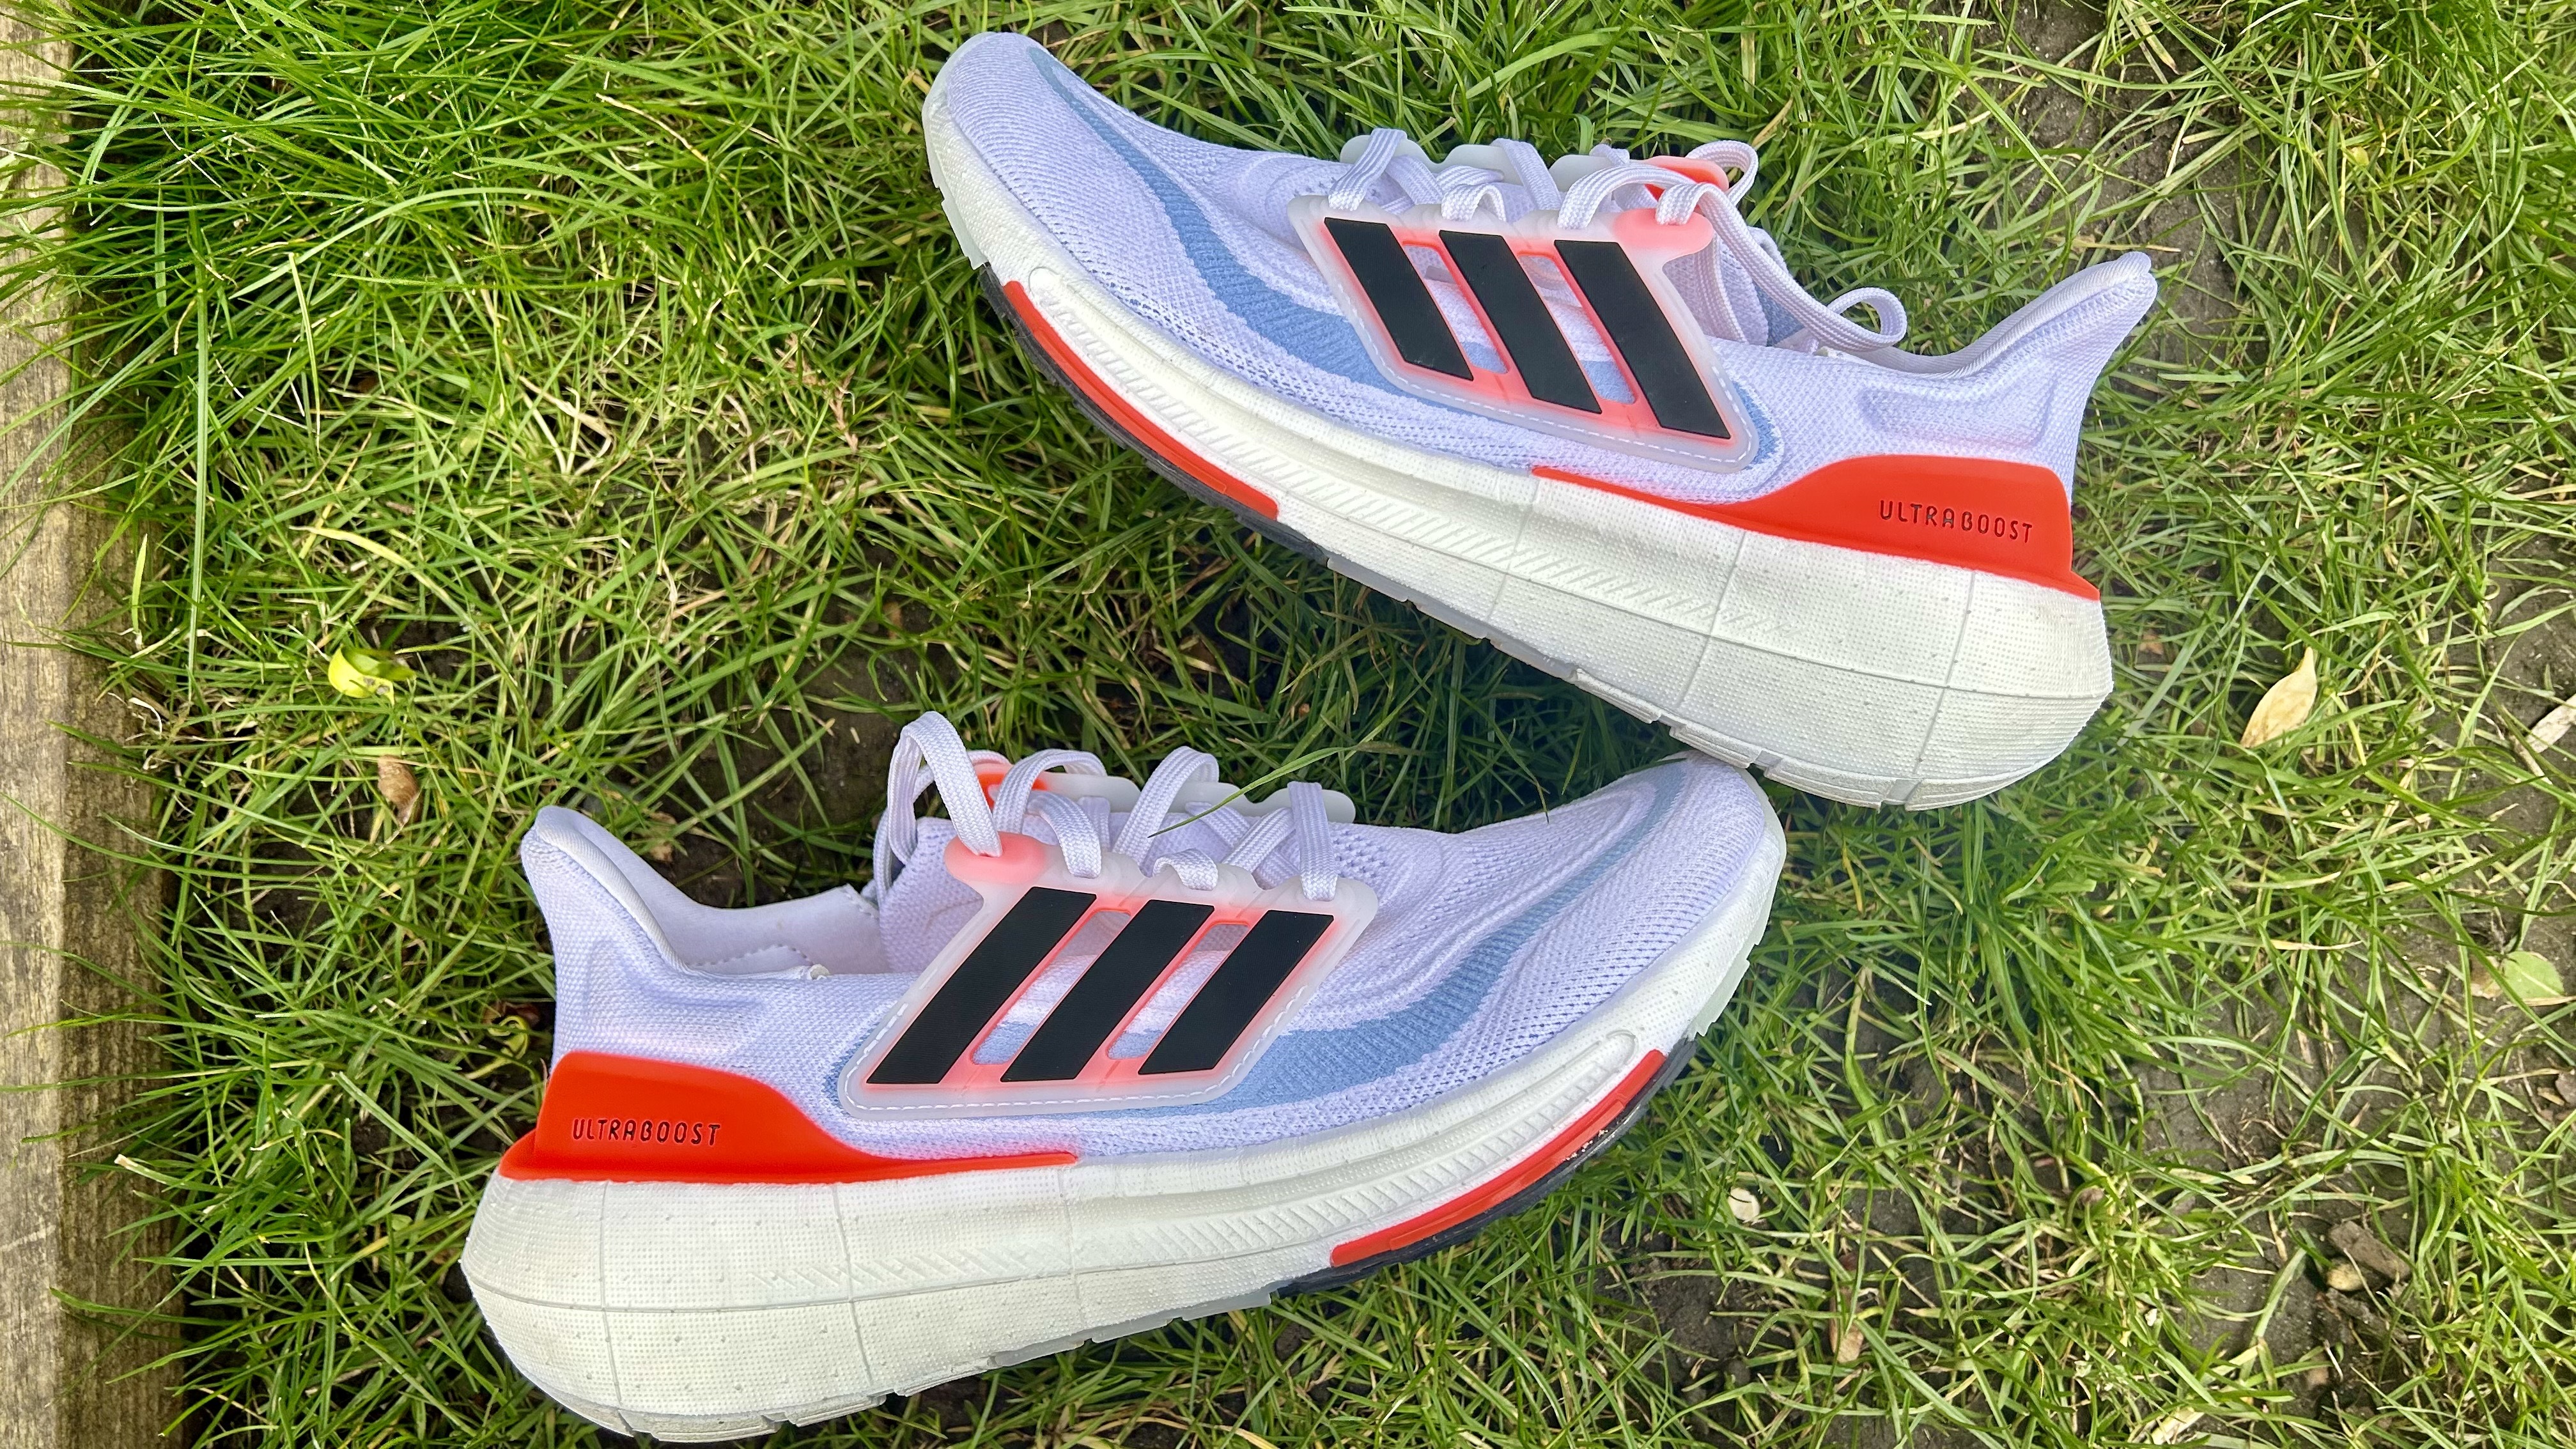 Adidas Ultraboost Light review Guide